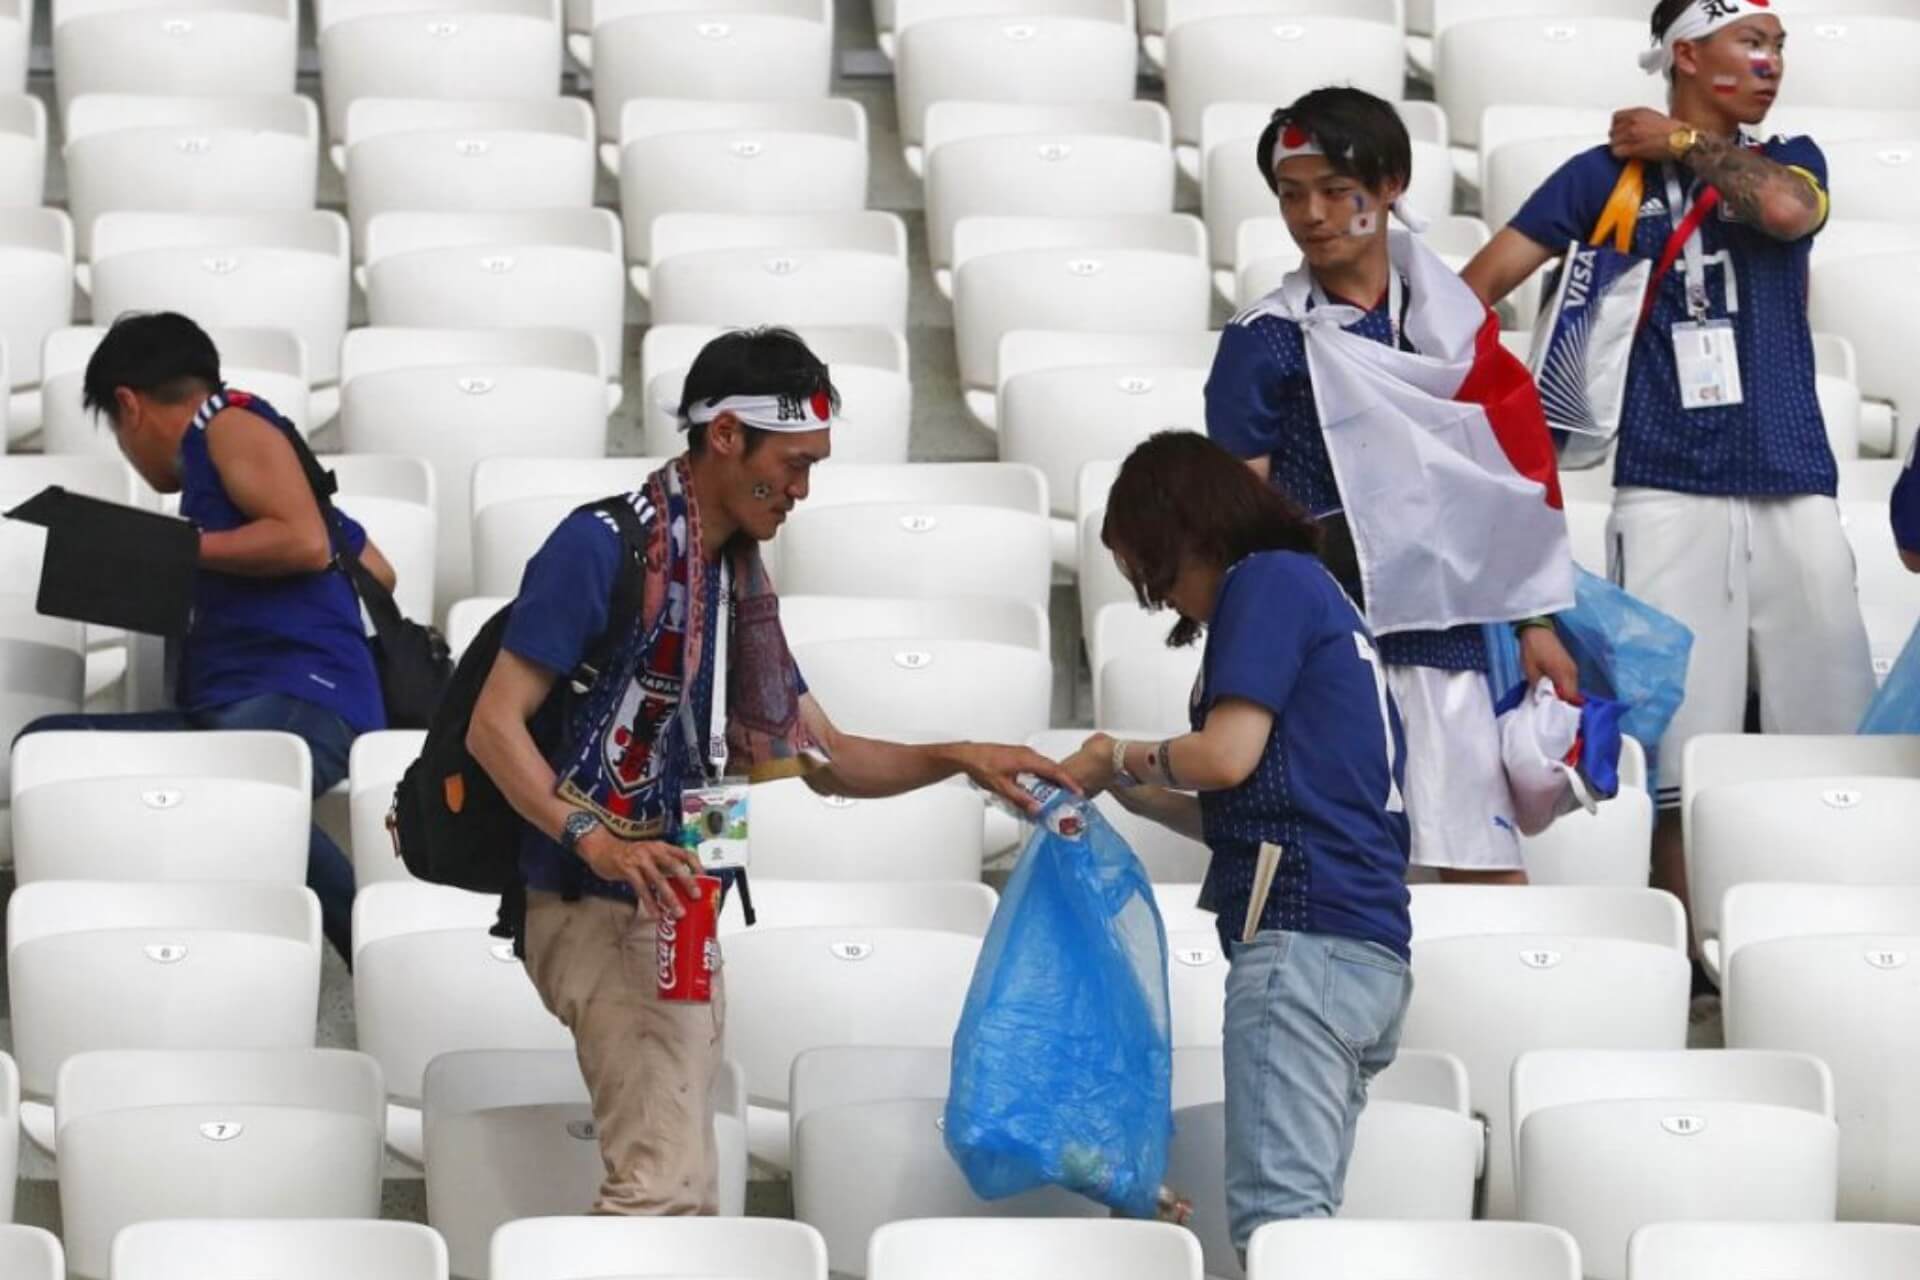 Japan wins World Cup of politeness